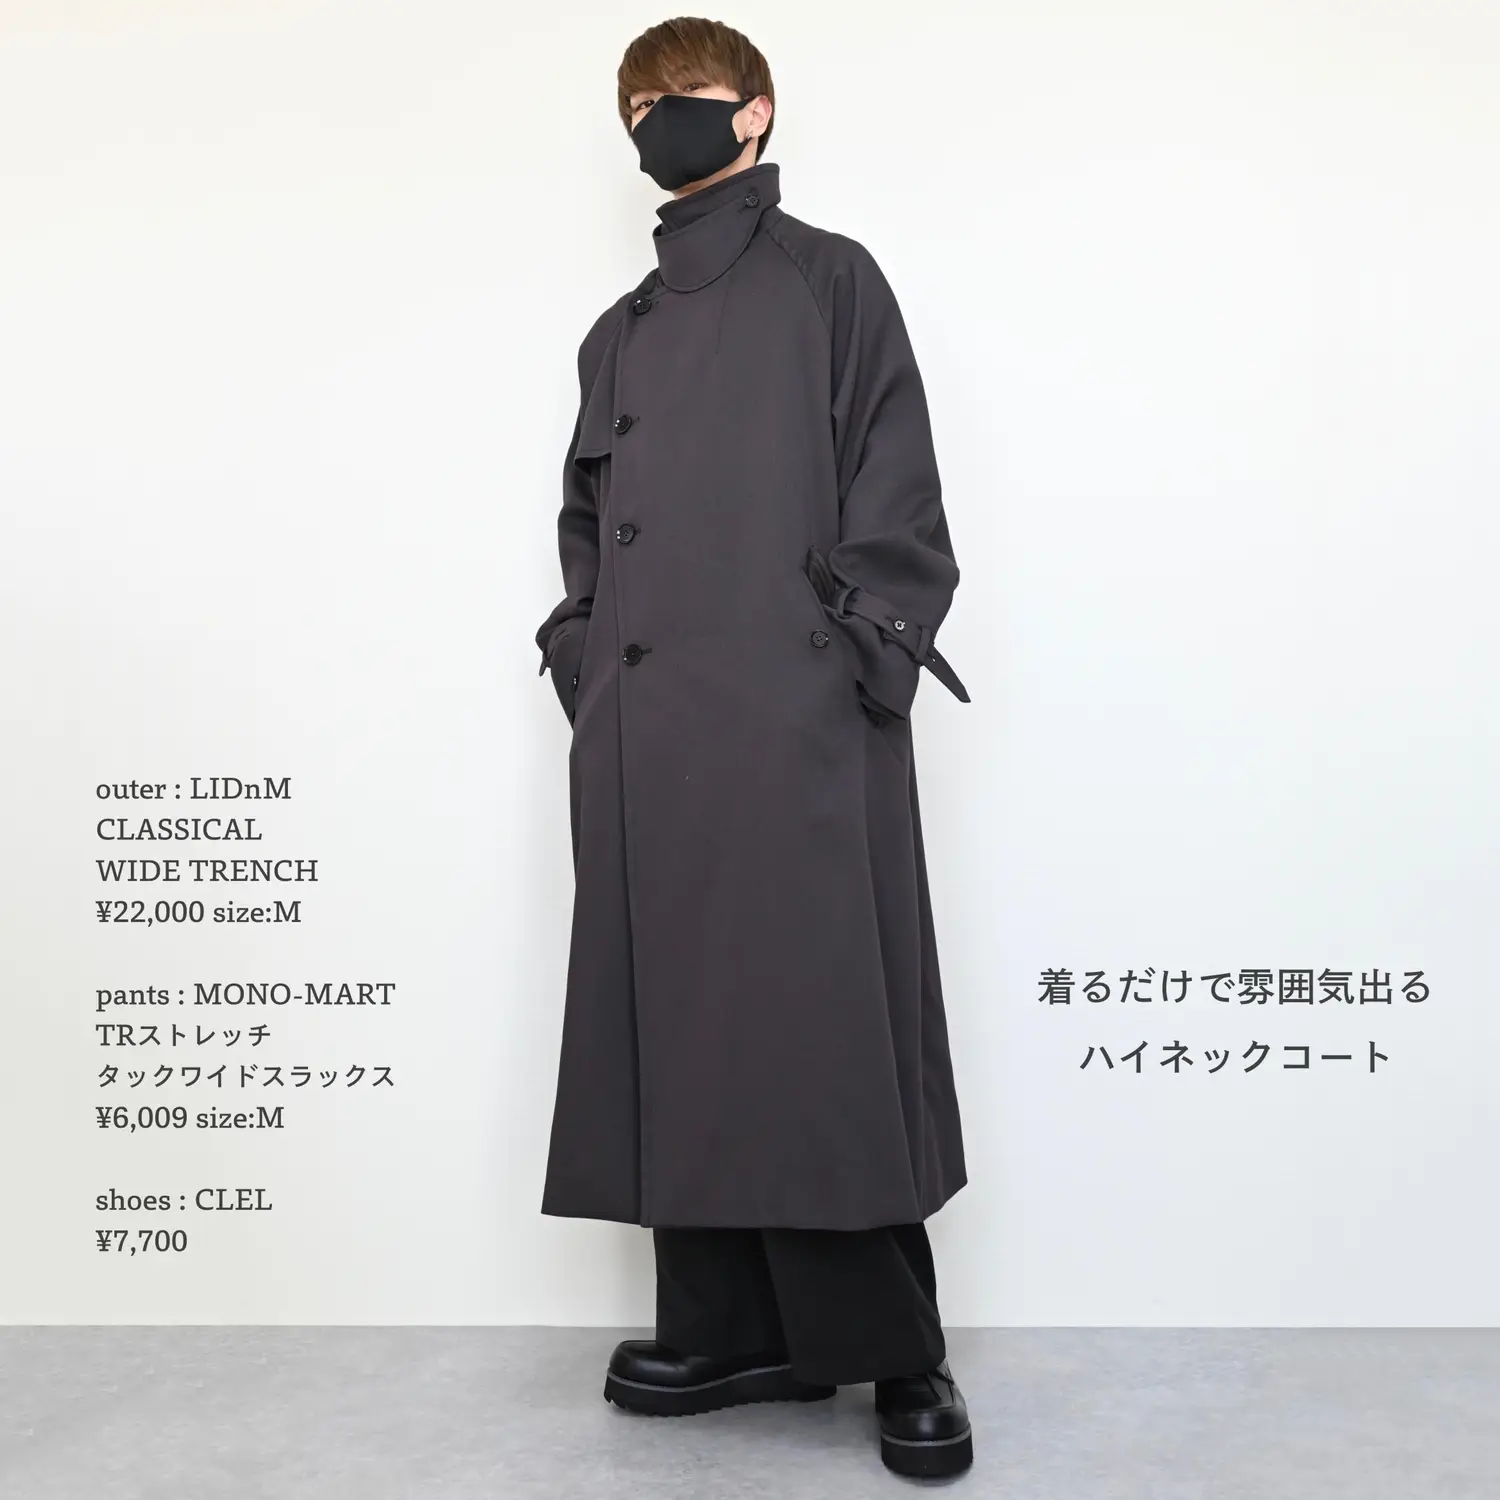 LIDNM CLASSICAL WIDE TRENCH  Mサイズ　新品未使用